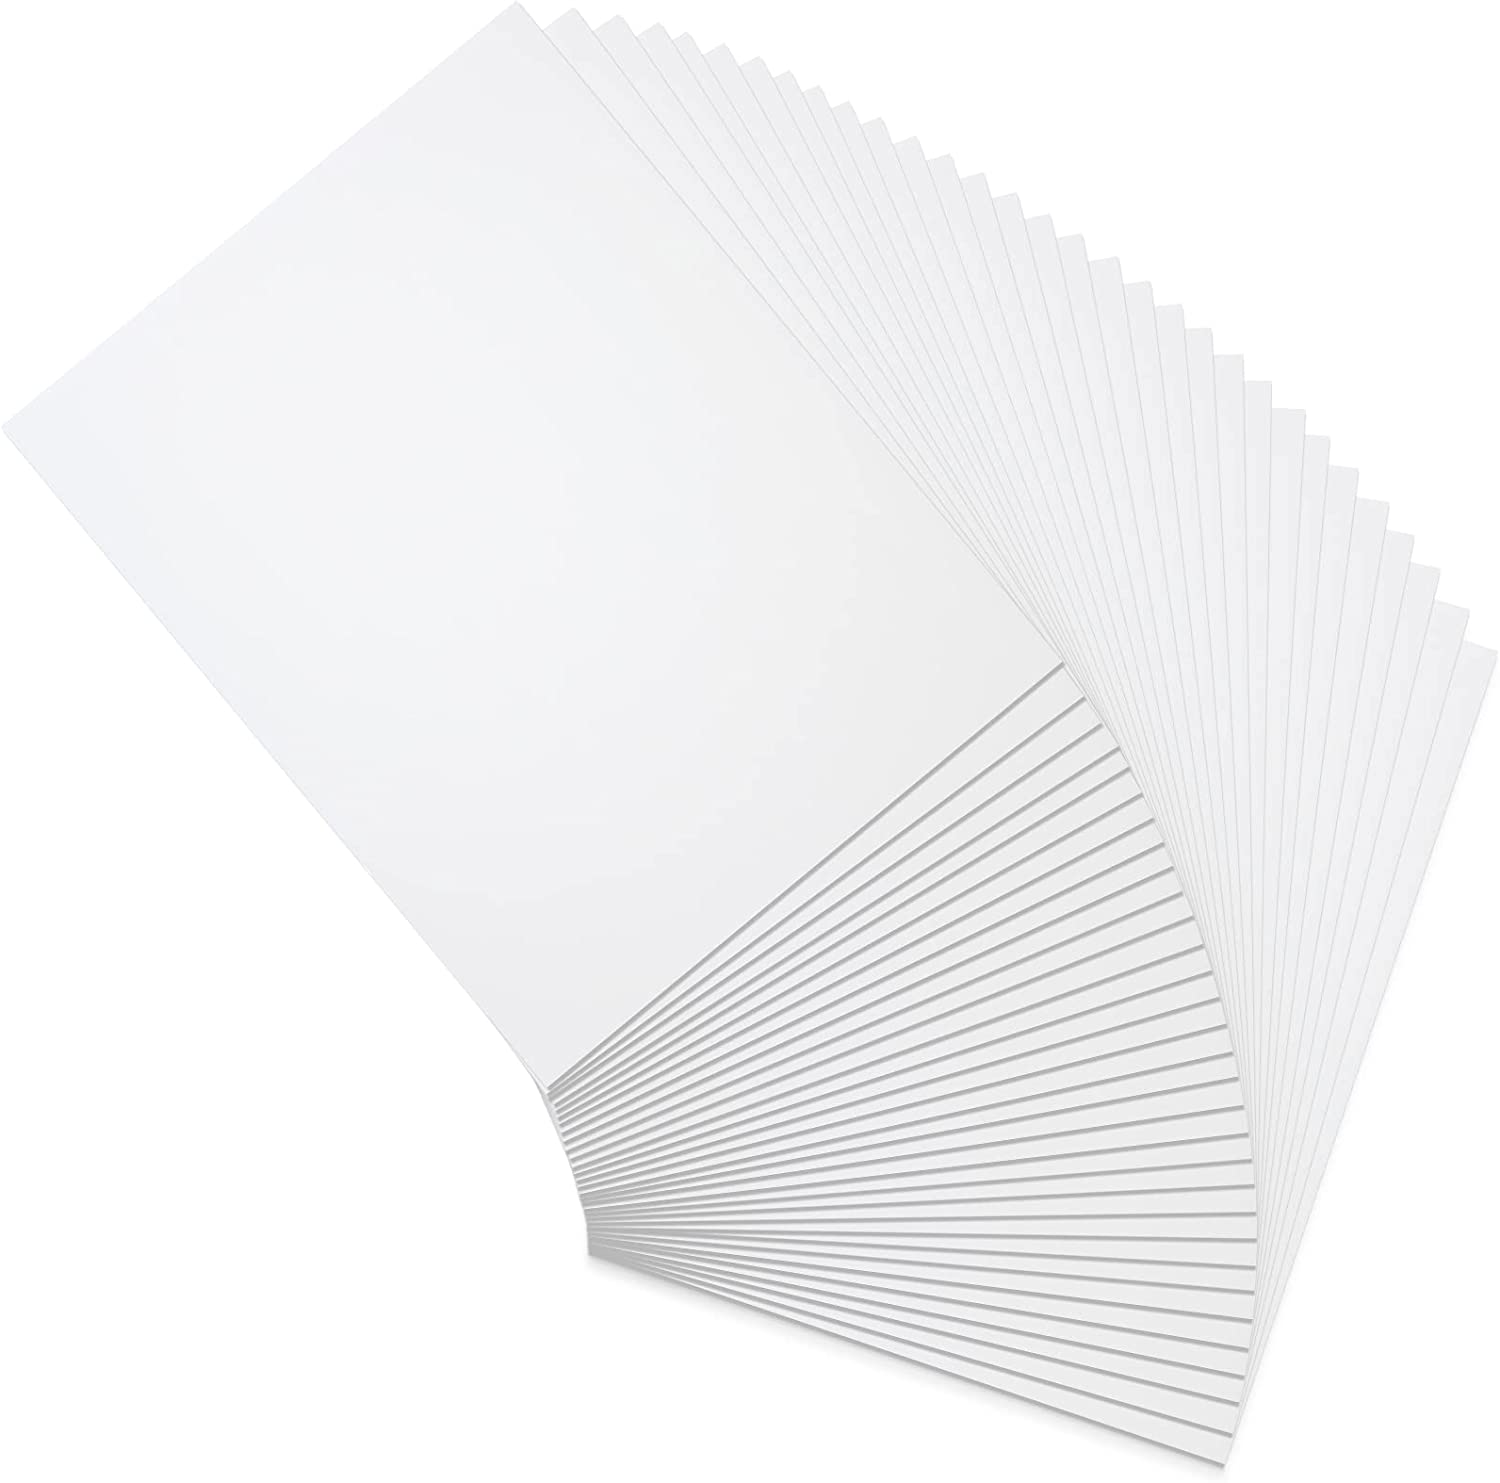 3/16 White Foam Core Boards 16x20-5 Pack. Many Sizes Available. Acid Free  Craft Poster Board for Signs, Buffered Presentations, School, Office and